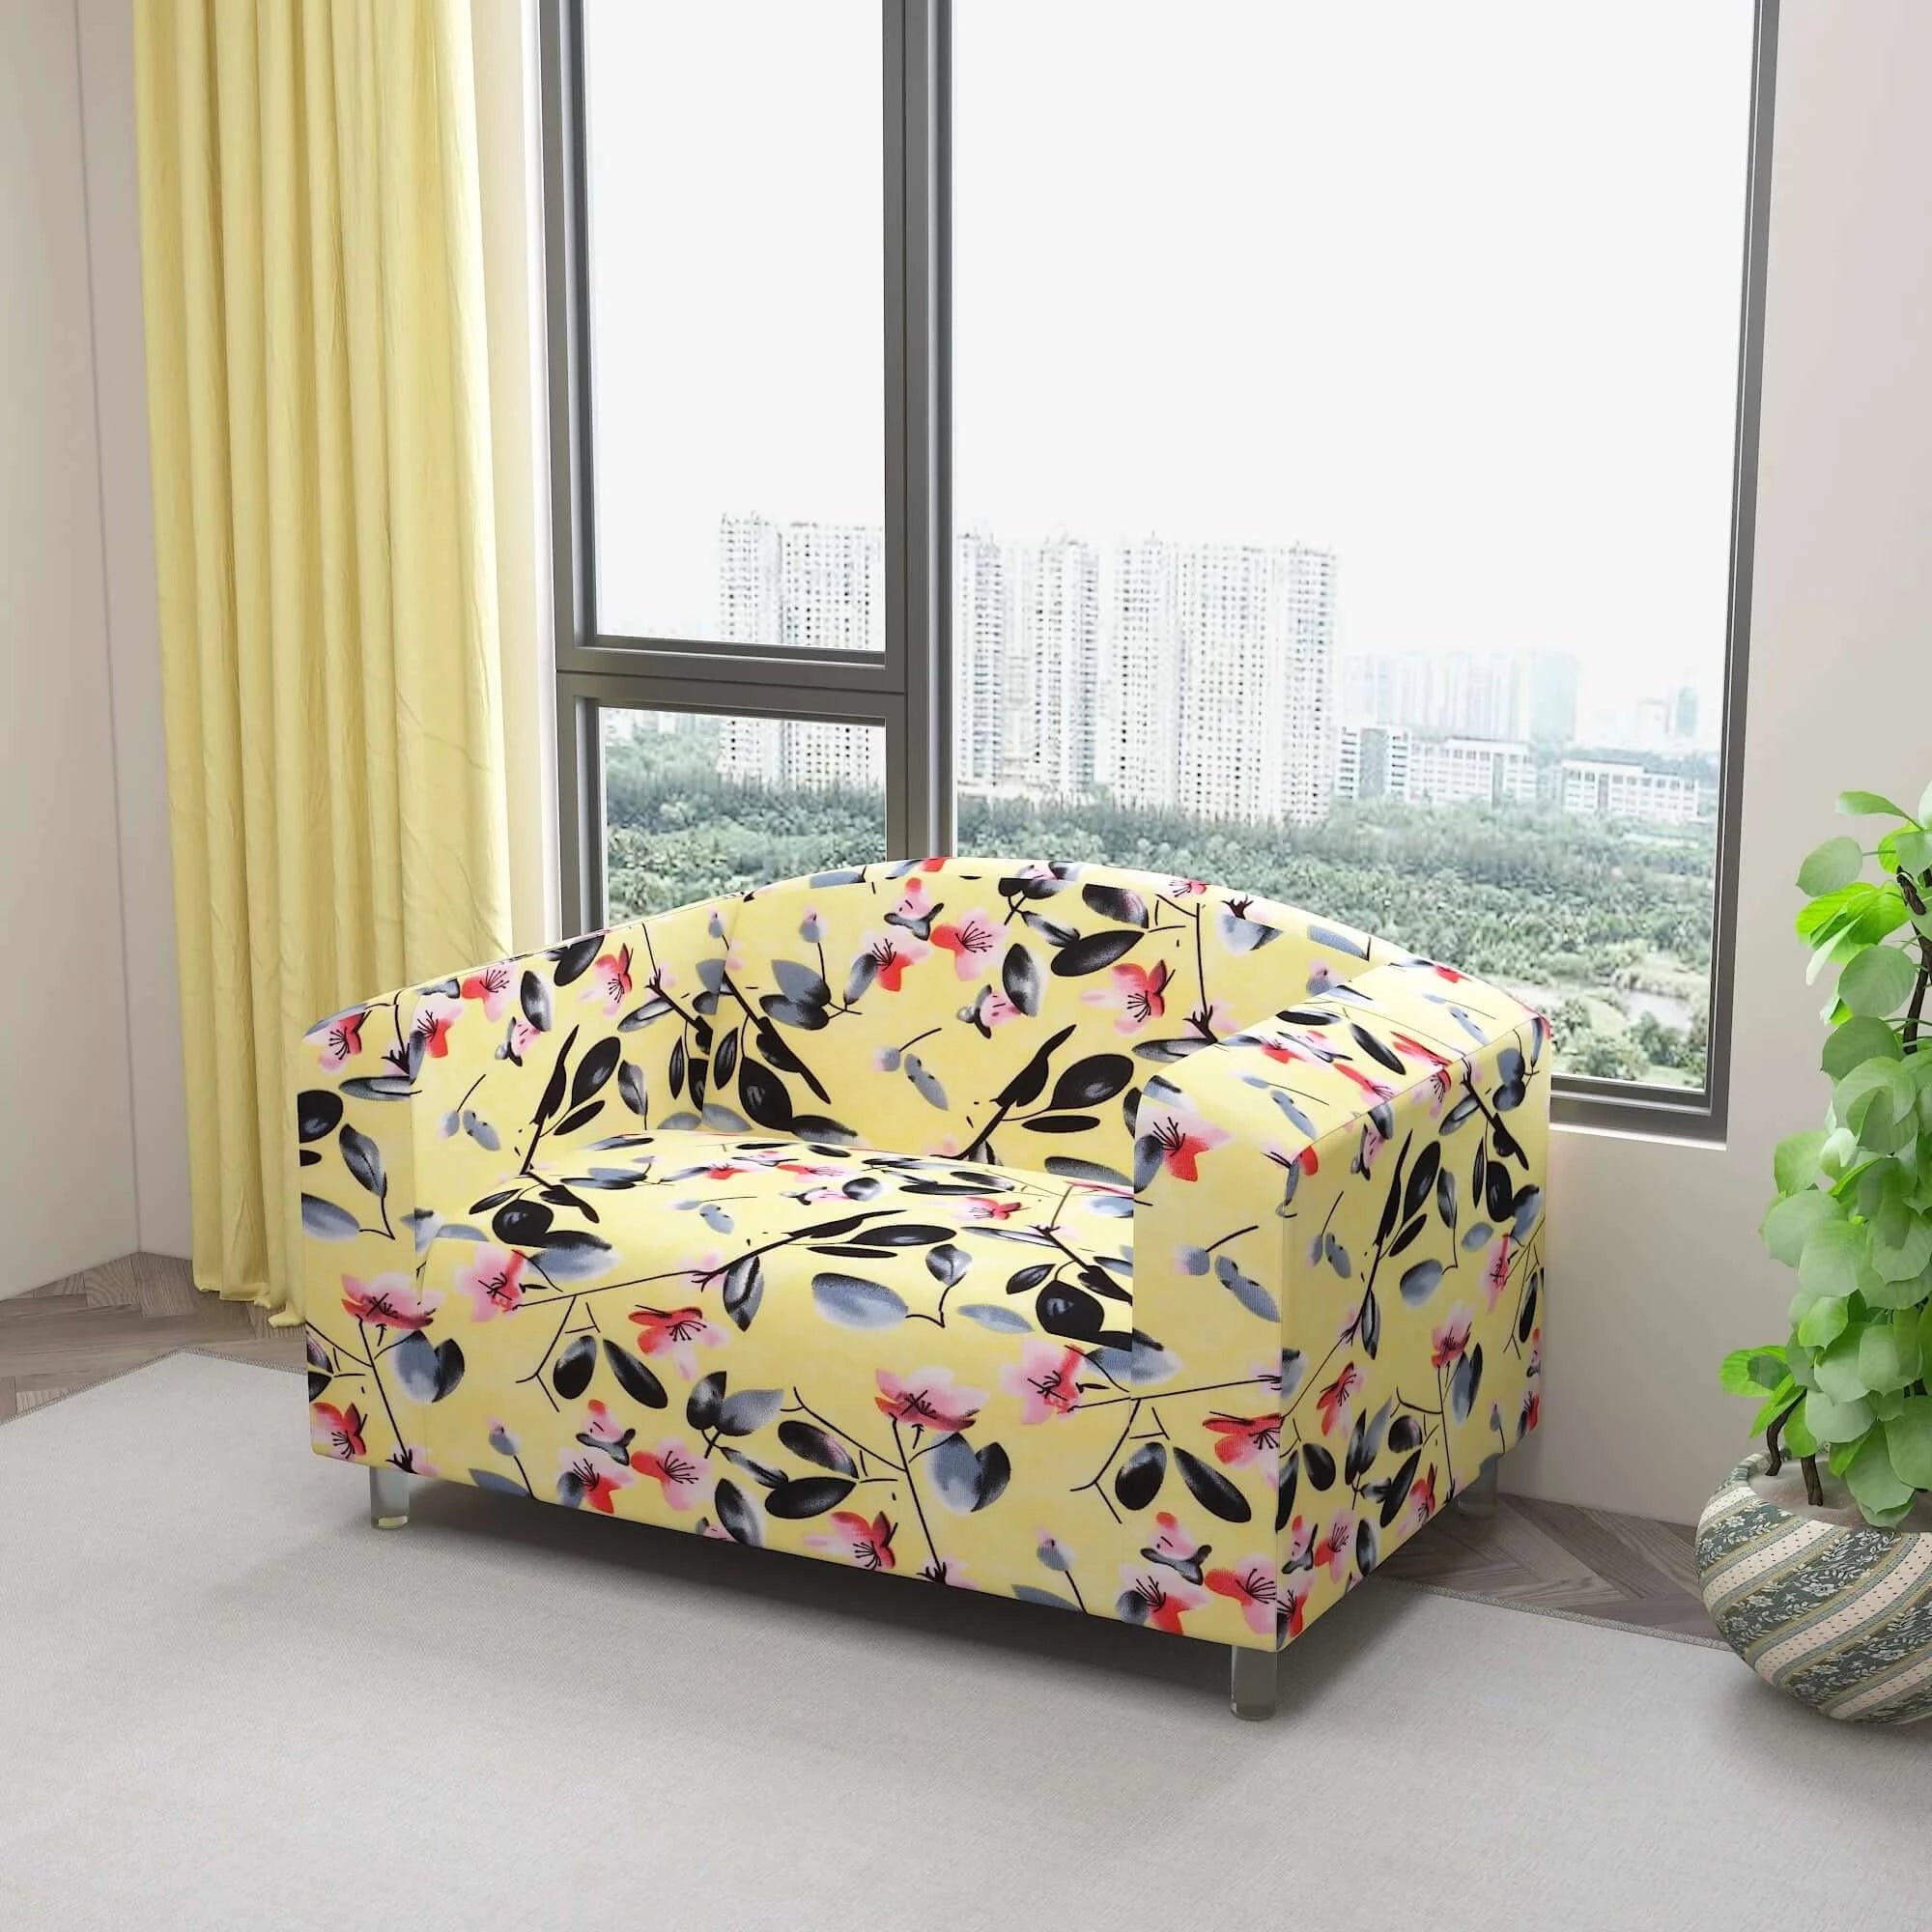 Marigold Printed Sofa Protector Cover Full Stretchable, MG10 - Dream Care Furnishings Private Limited